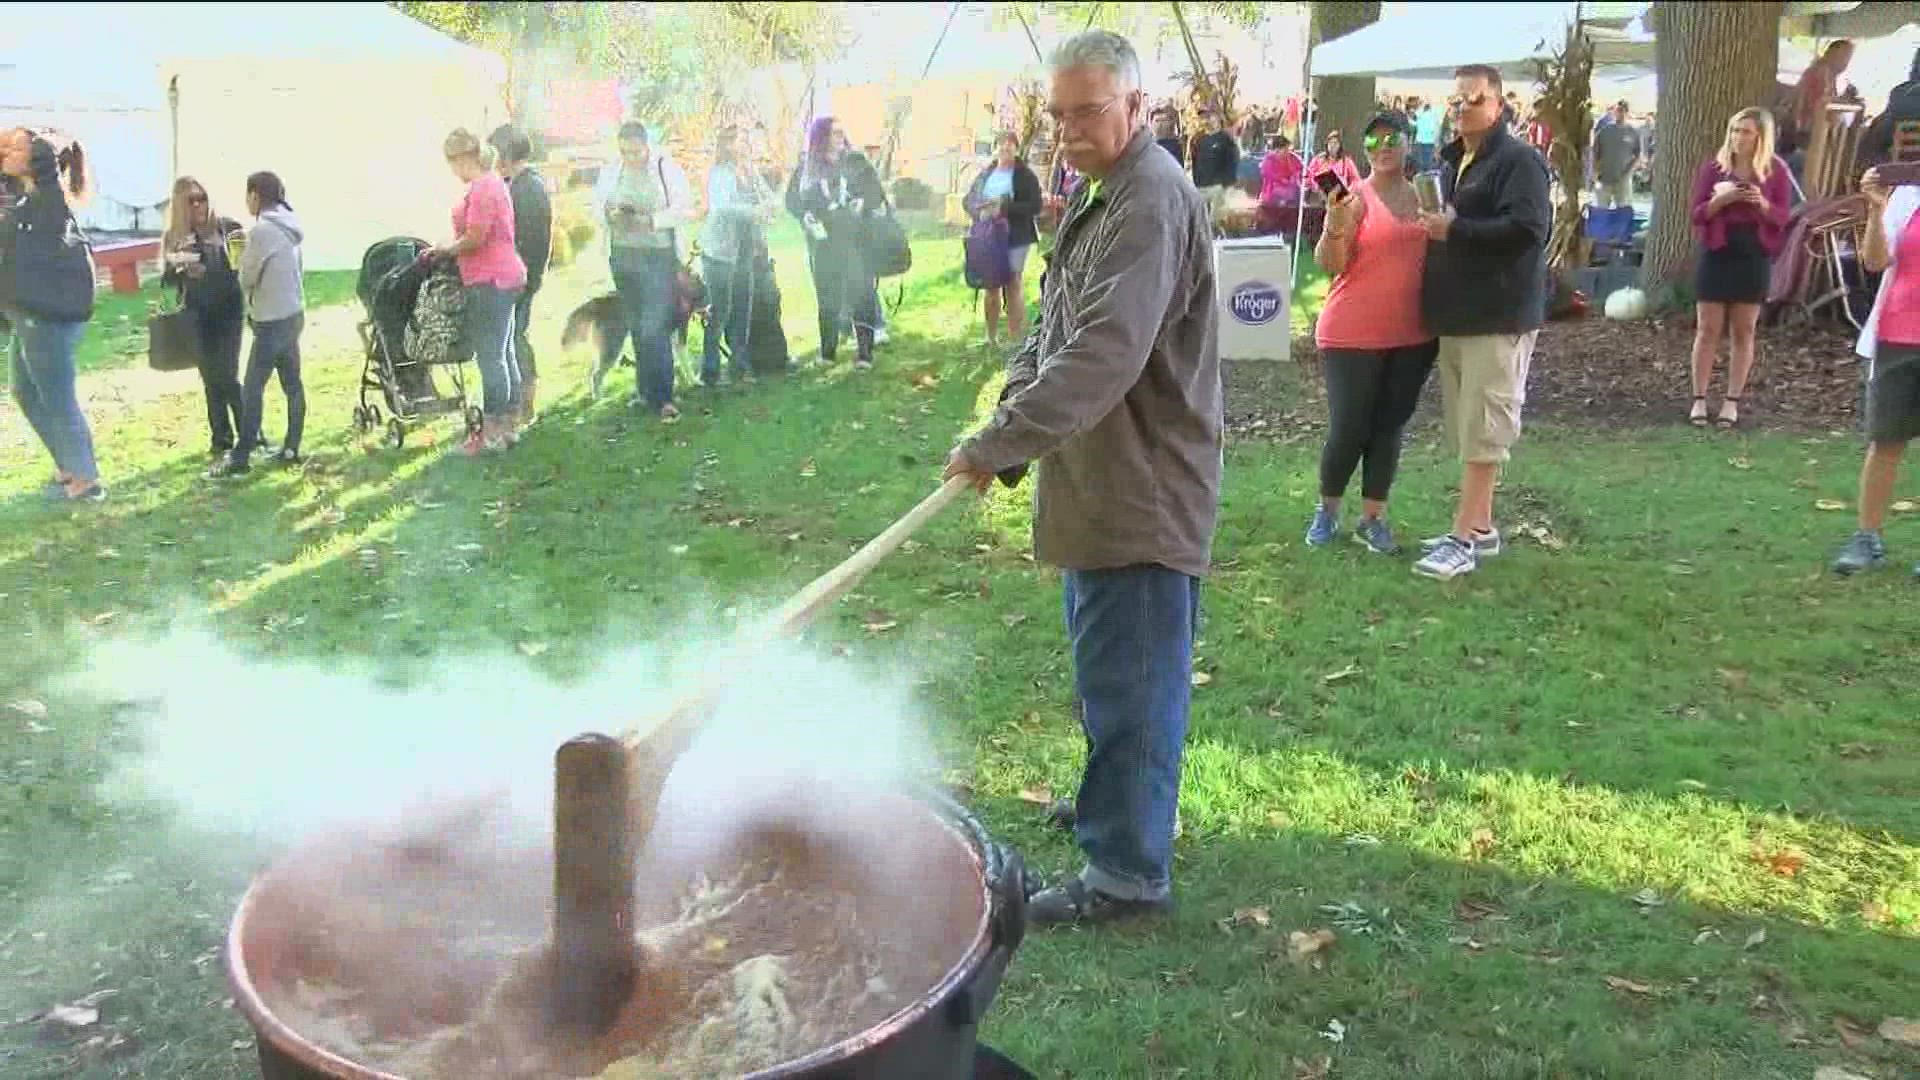 The one-day Grand Rapids Applebutter Fest draws in about 40,000 visitors to the small Wood County village every year.